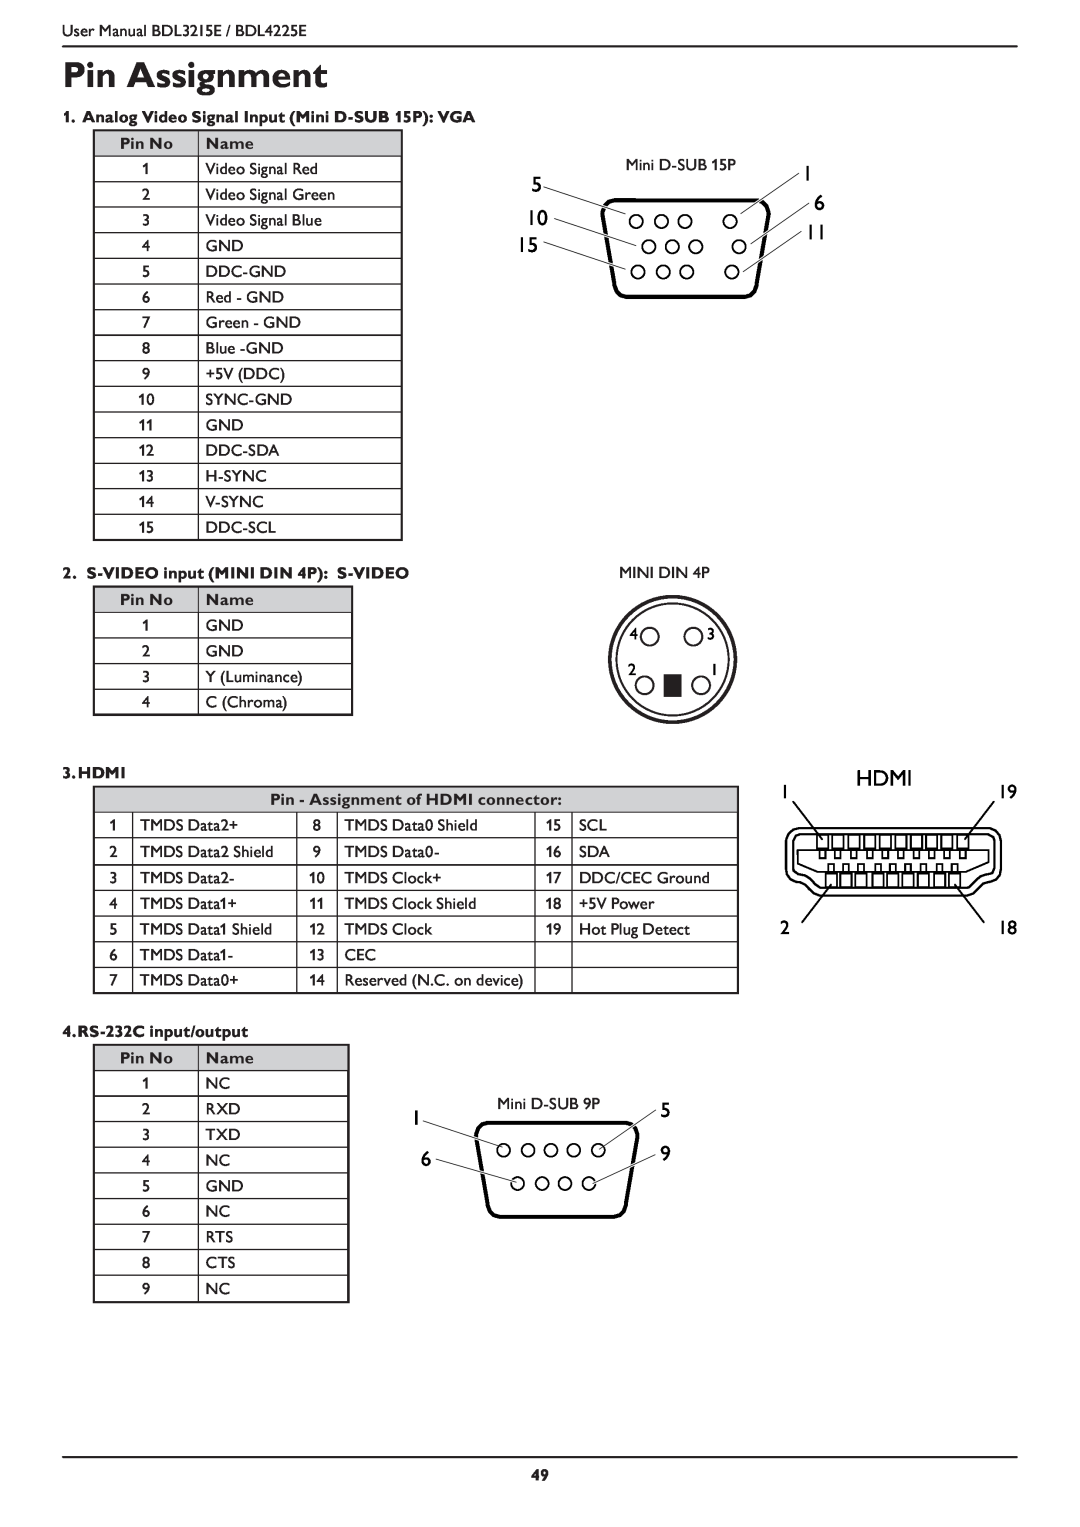 Philips BDL4225E, BDL3215E user manual Pin Assignment, Hdmi 